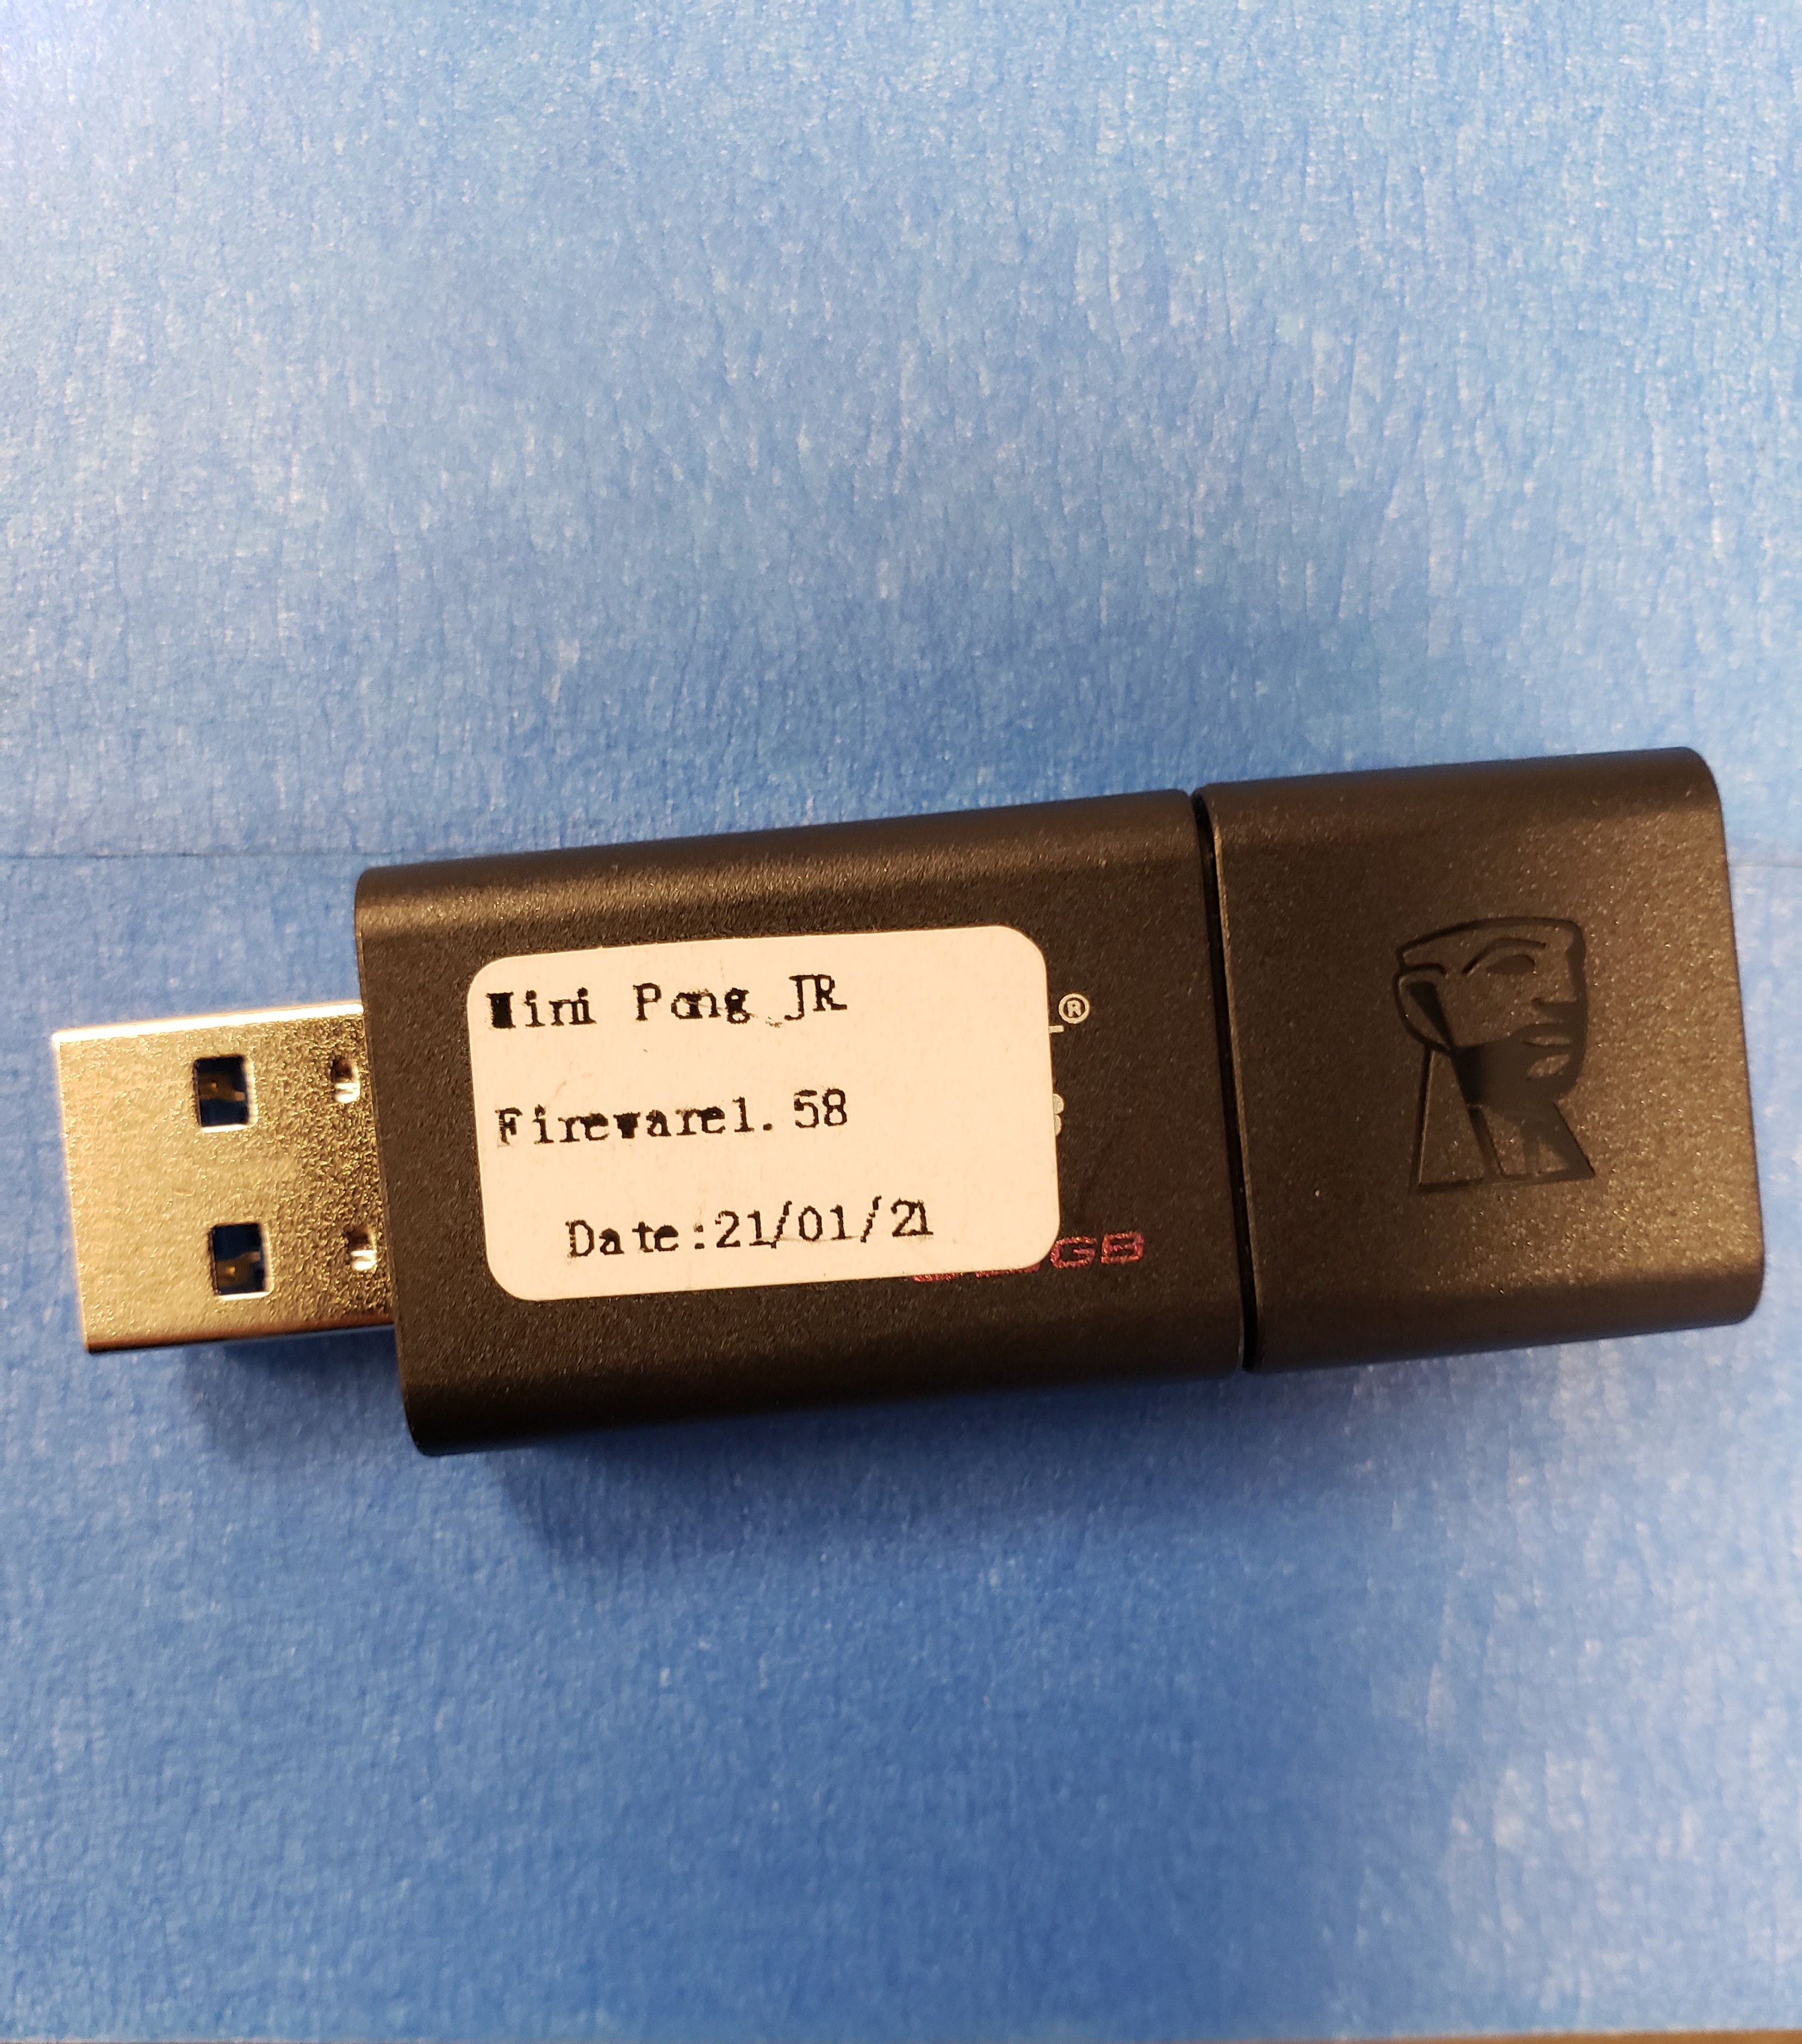 PJR-USB-000 Mini Pong Jr. Update Software | Unis Parts and Service